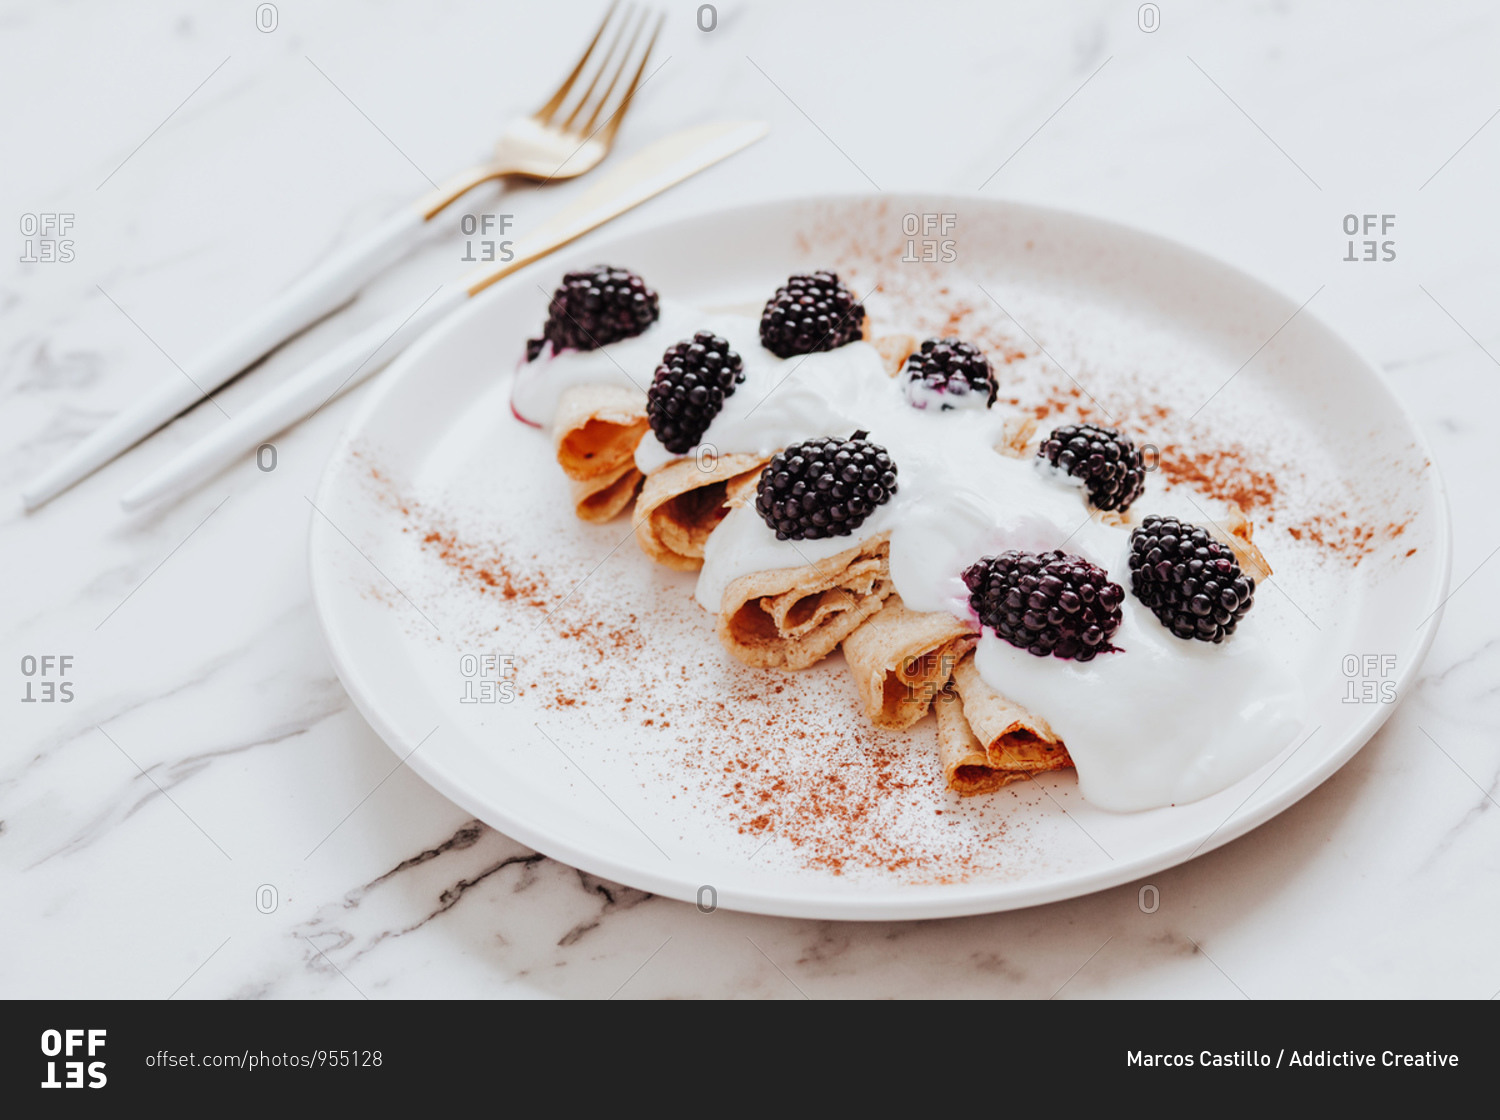 Delicious crepes with yoghurt and blackberries served on plate with cinnamon near silverware on marble table